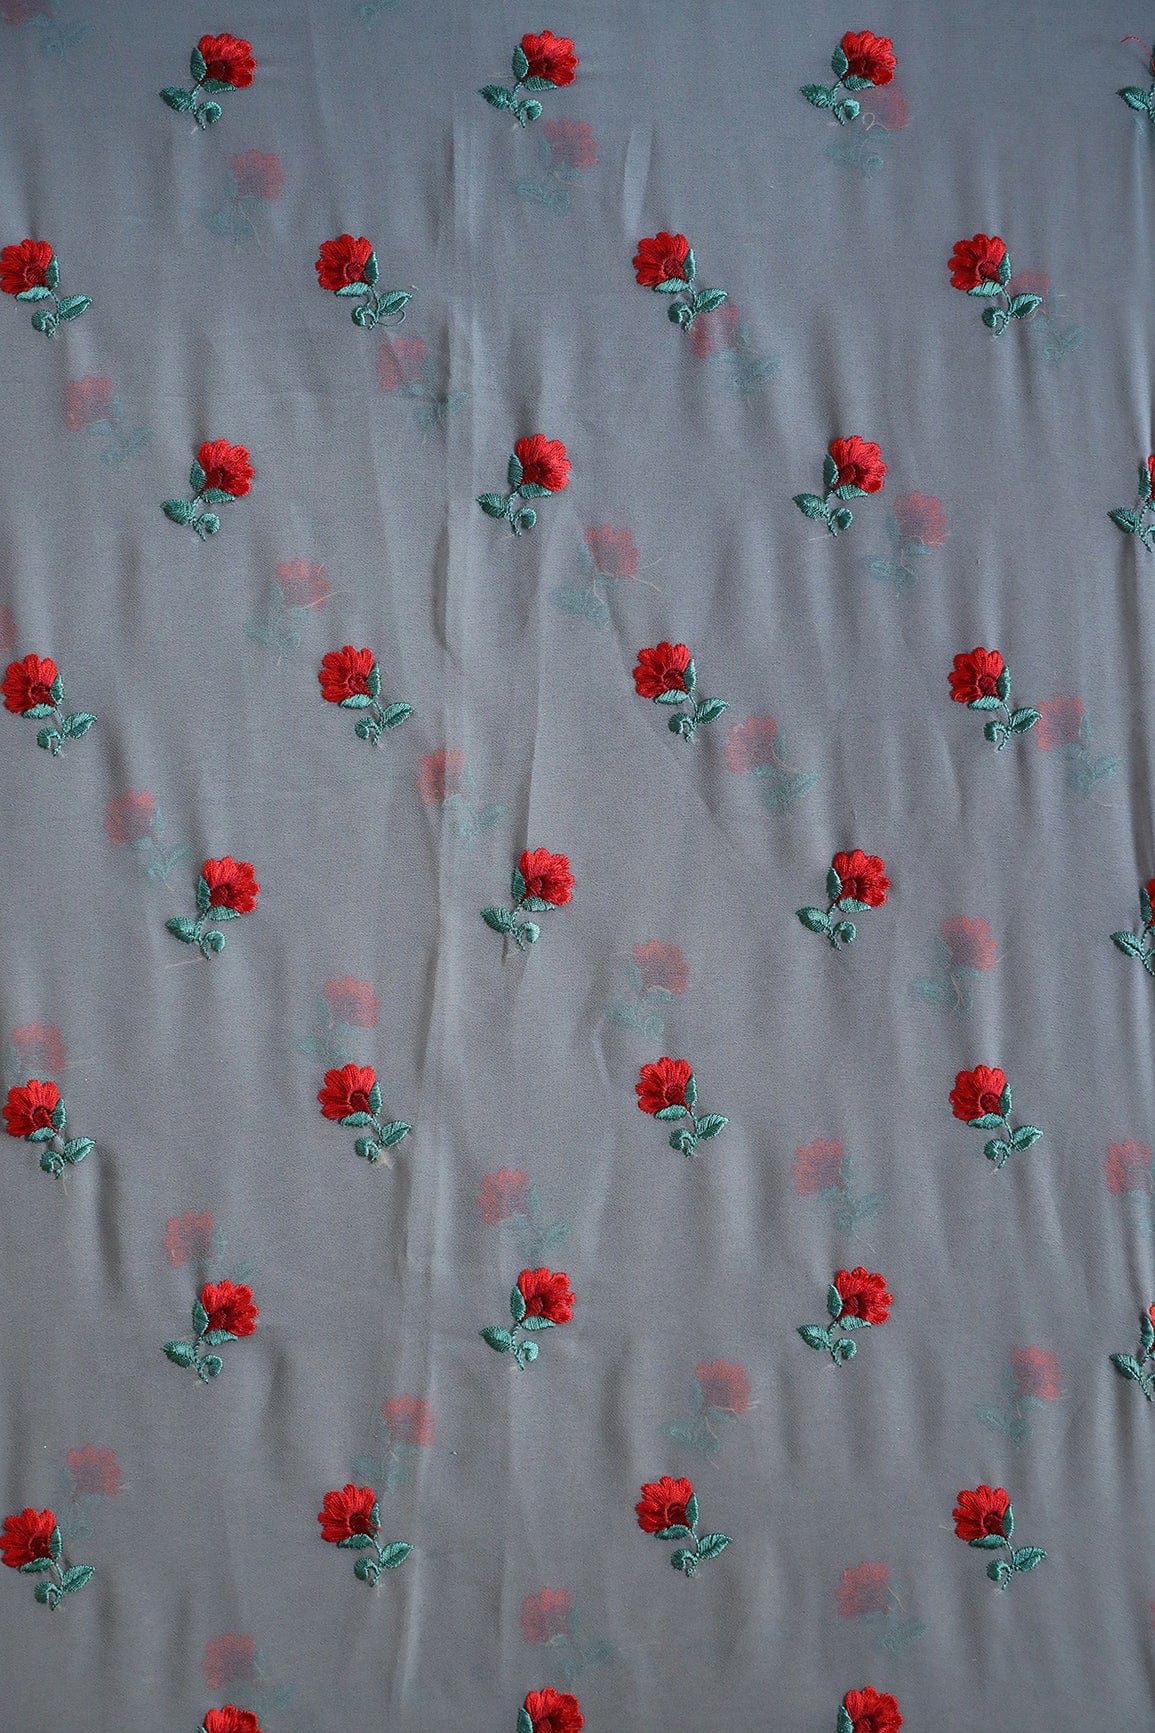 doeraa Embroidery Fabrics 1.50 Meter Cut Piece Of Red Thread Small Floral Embroidery On Grey Georgette Fabric